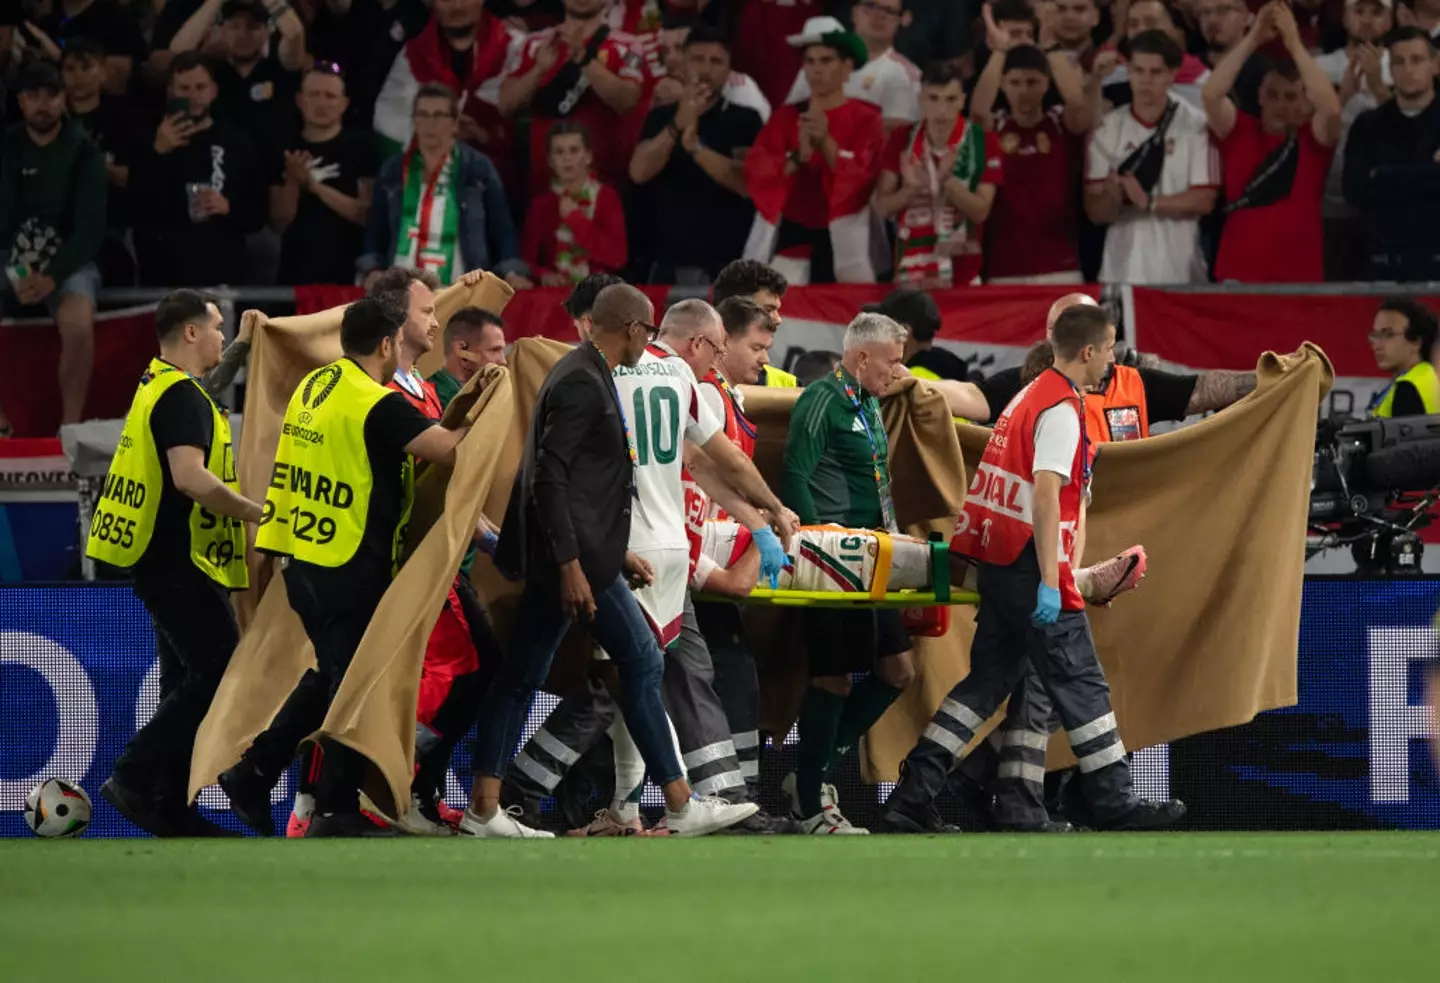 Hungary's Barnabas Varga was stretchered off the pitch (